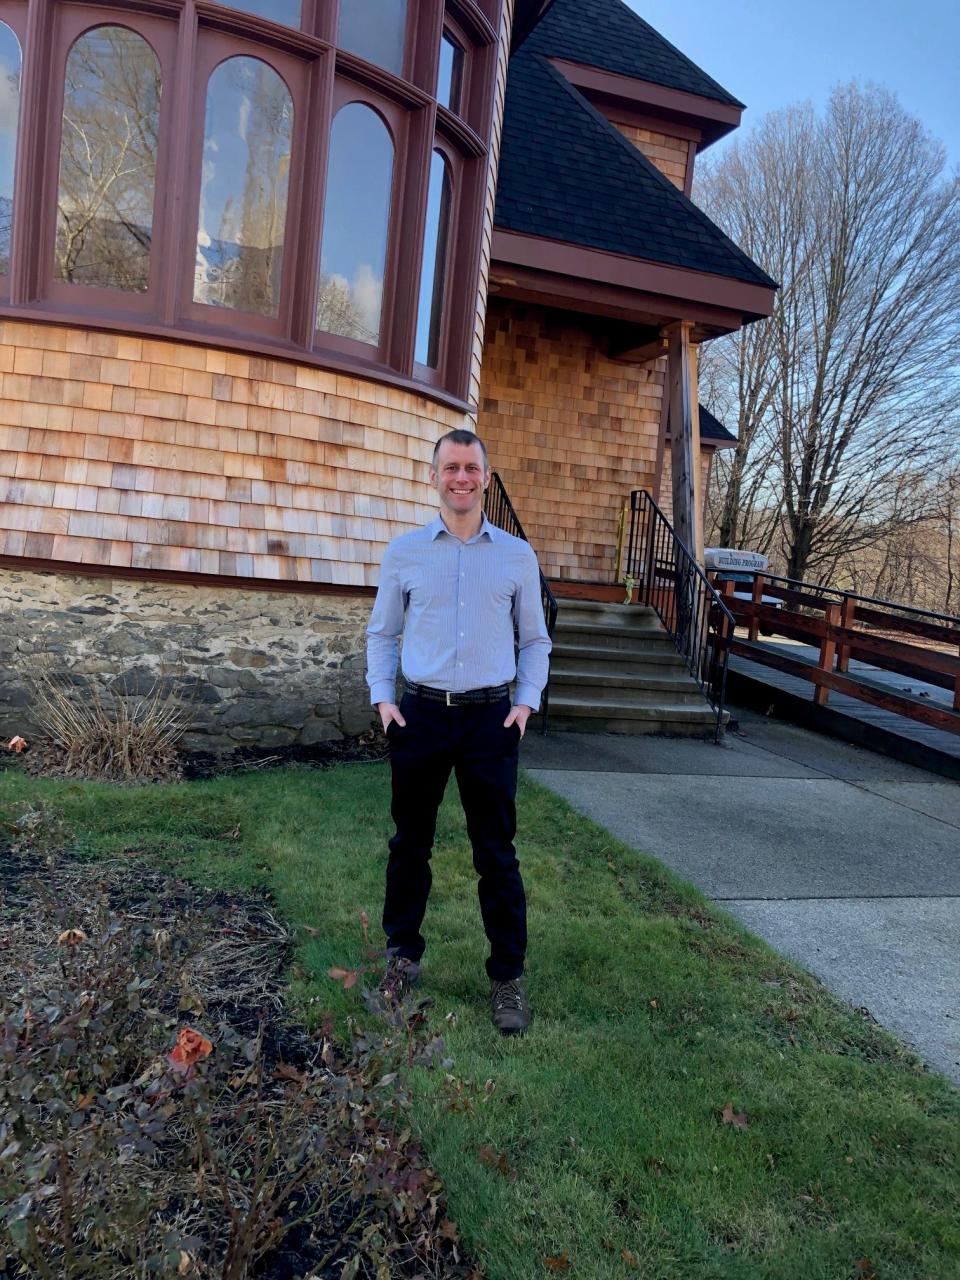 Mark Procknik, who will be starting as the Dighton Public Library's new director on Monday, Dec. 18, 2023, is seen here at Smith Memorial Hall on Main Street, which is being renovated as the new home of the library.